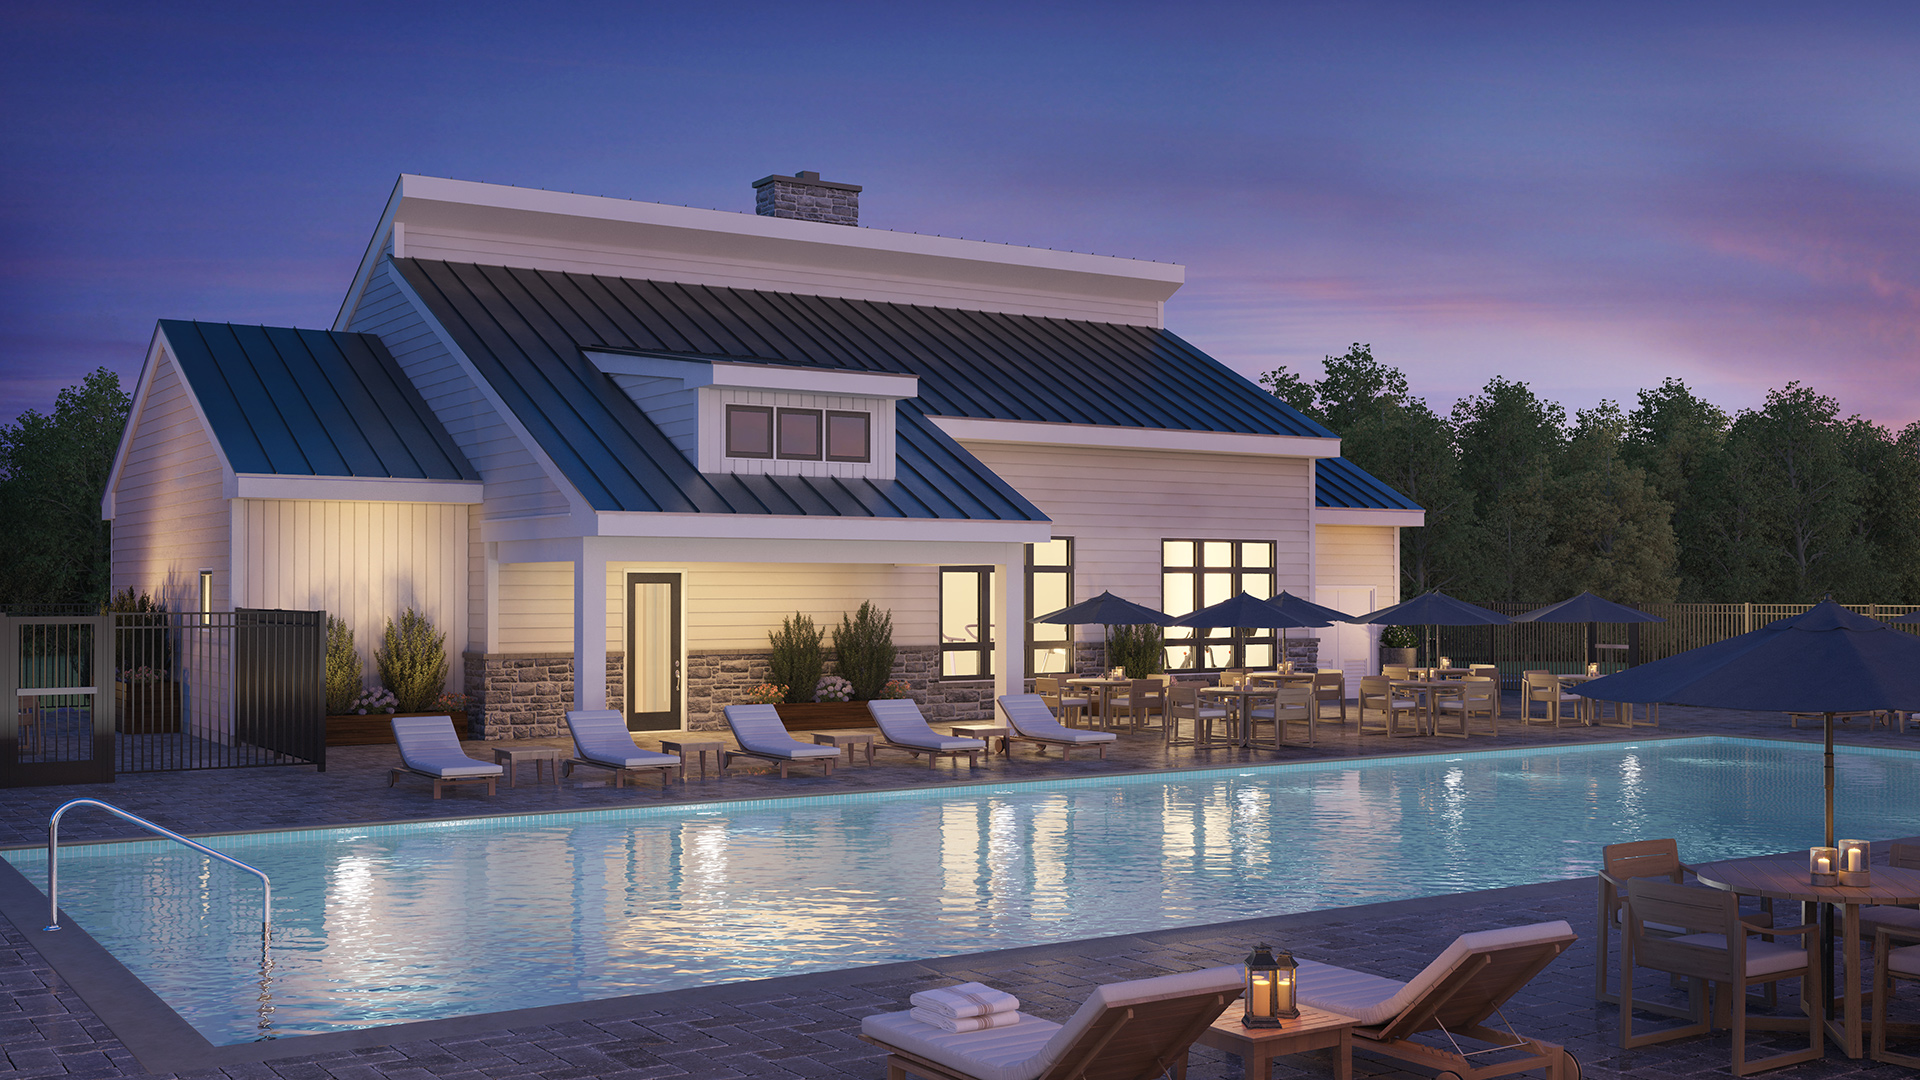 Enjoy summer days at the clubhouse pool